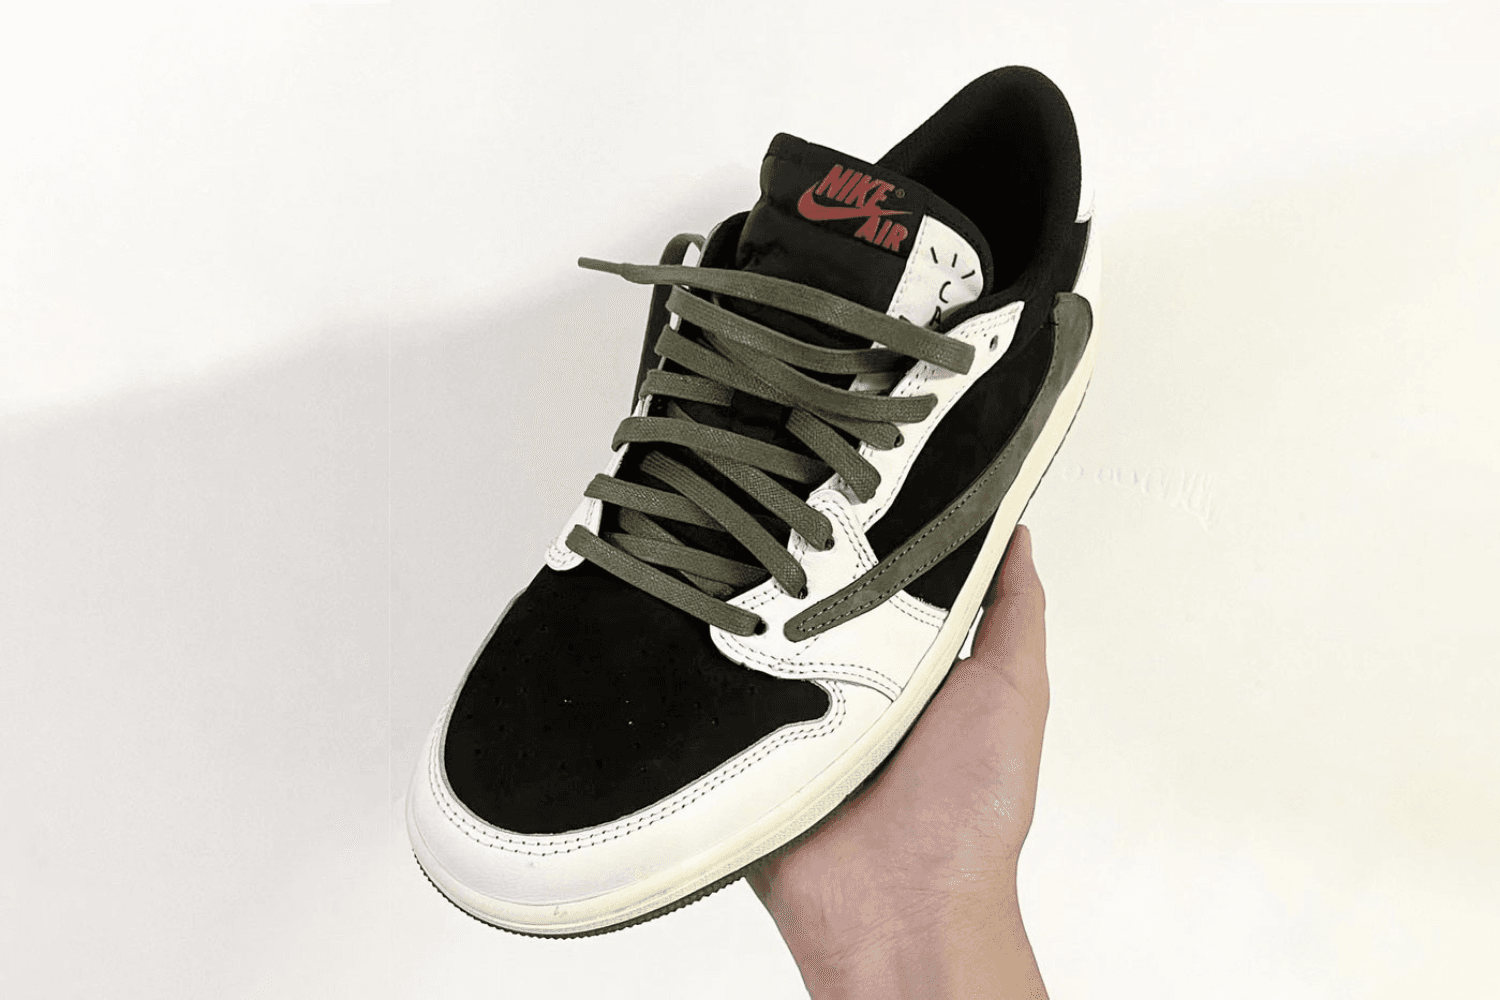 A first look at the Travis Scott x Air Jordan 1 Low OG 'Olive'